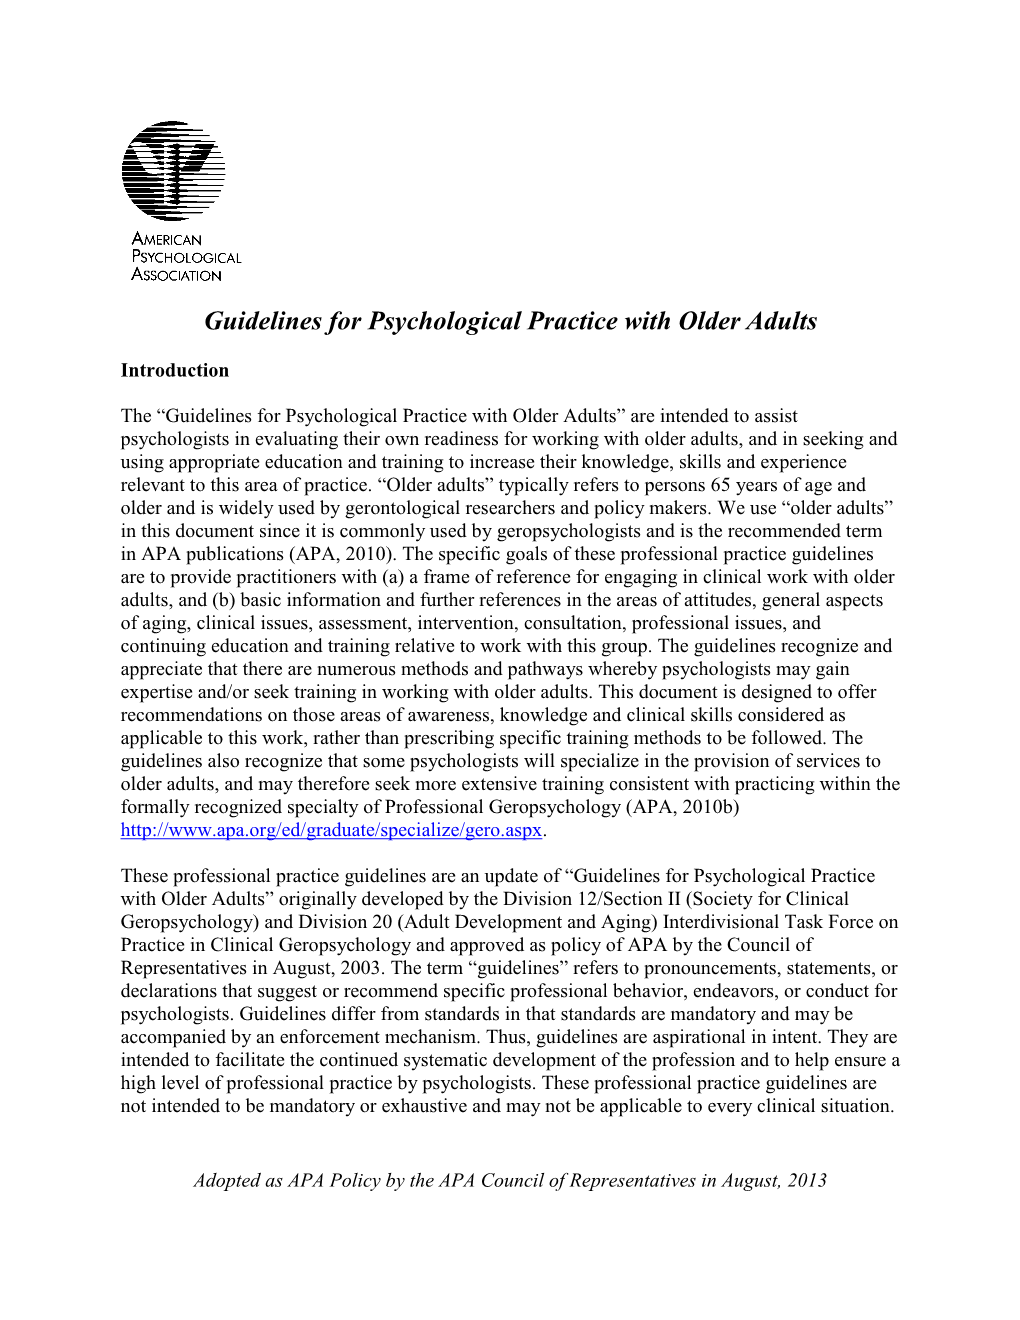 Guidelines for Psychological Practice with Older Adults